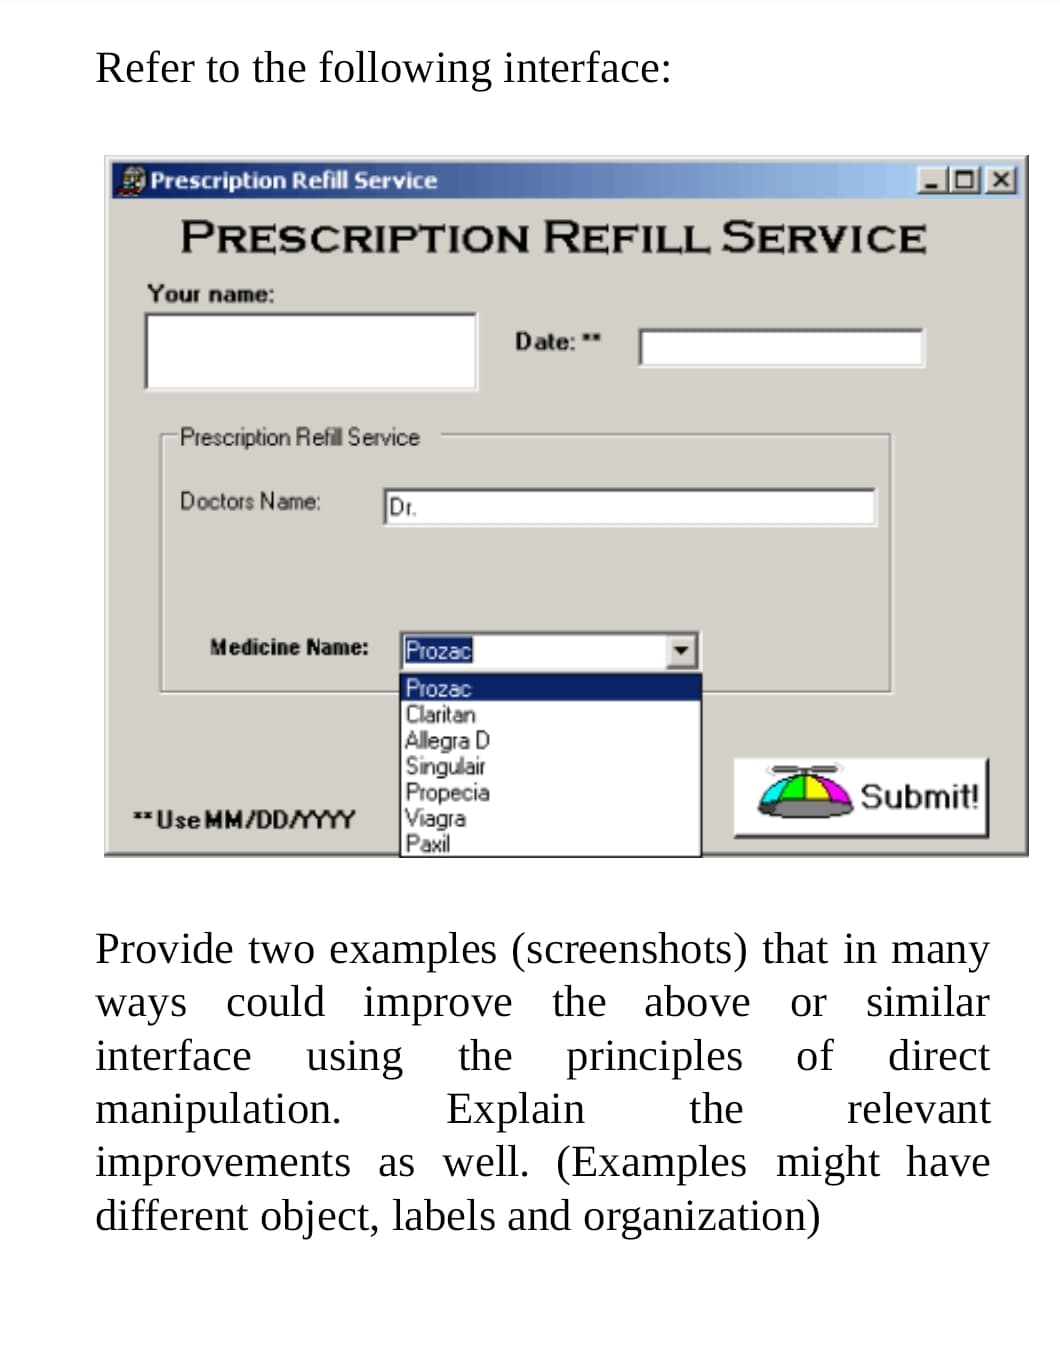 Refer to the following interface:
Prescription Refill Service
PRESCRIPTION REFILL SERVICE
Your name:
Date: "
Presciption Refil Service
Doctors Name:
Dr.
Prozac
Prozac
Claritan
Allegra D
Singulair
Propecia
Viagra
Paxil
Medicine Name:
Submit!
*Use MM/DDYYY
Provide two examples (screenshots) that in many
ways could improve the above or similar
using the principles
Explain
improvements as well. (Examples might have
different object, labels and organization)
interface
of
direct
manipulation.
the
relevant
